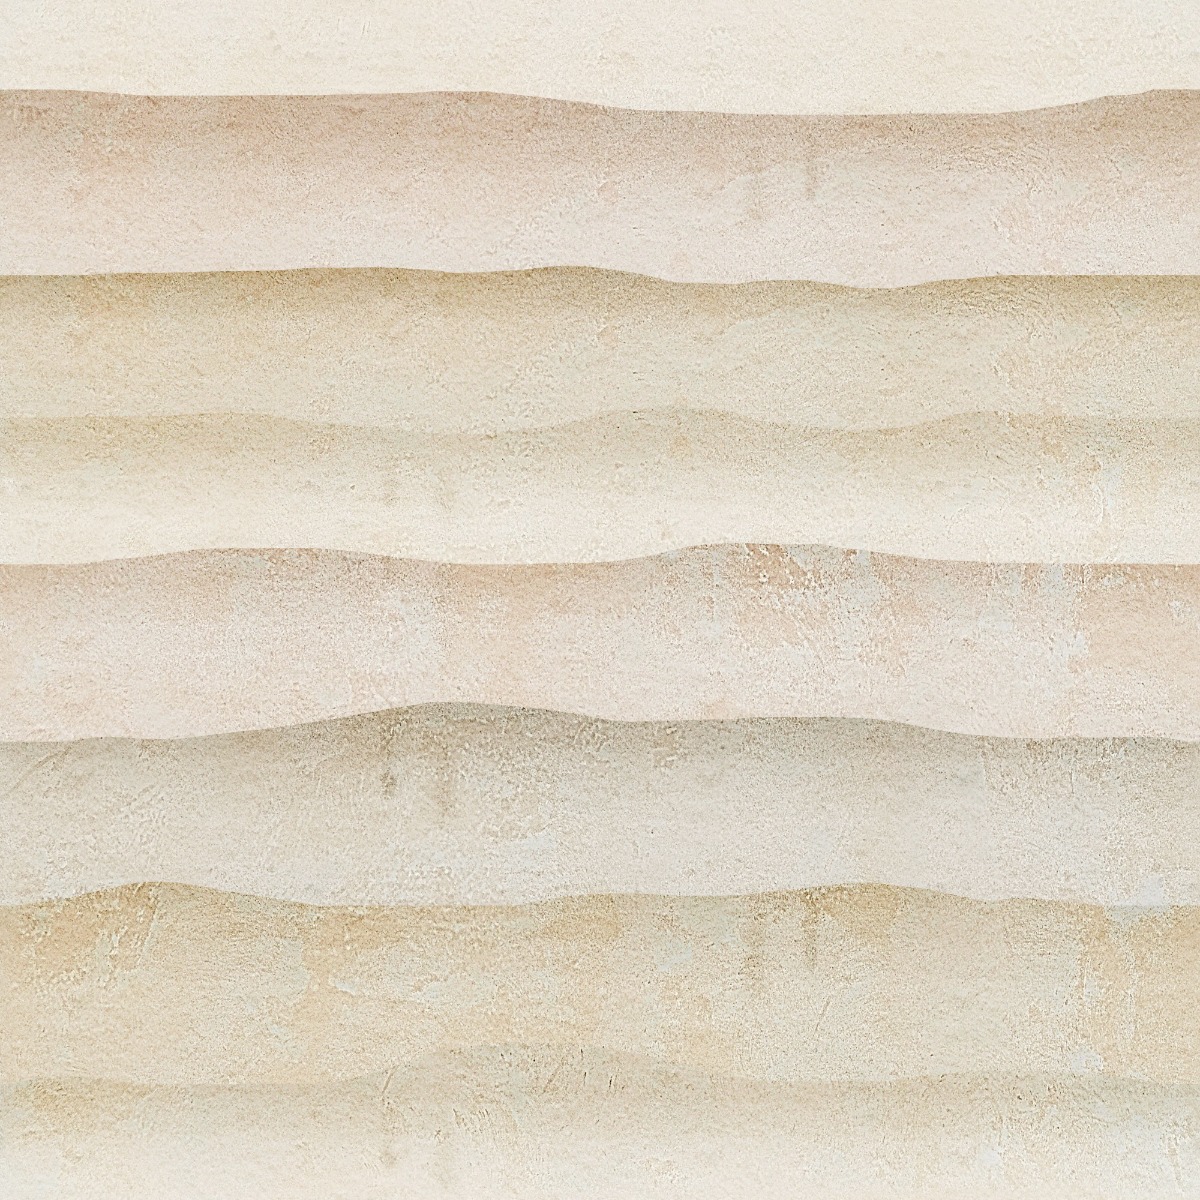 A seamless organic texture with warm toned rammed earth units arranged in a None pattern